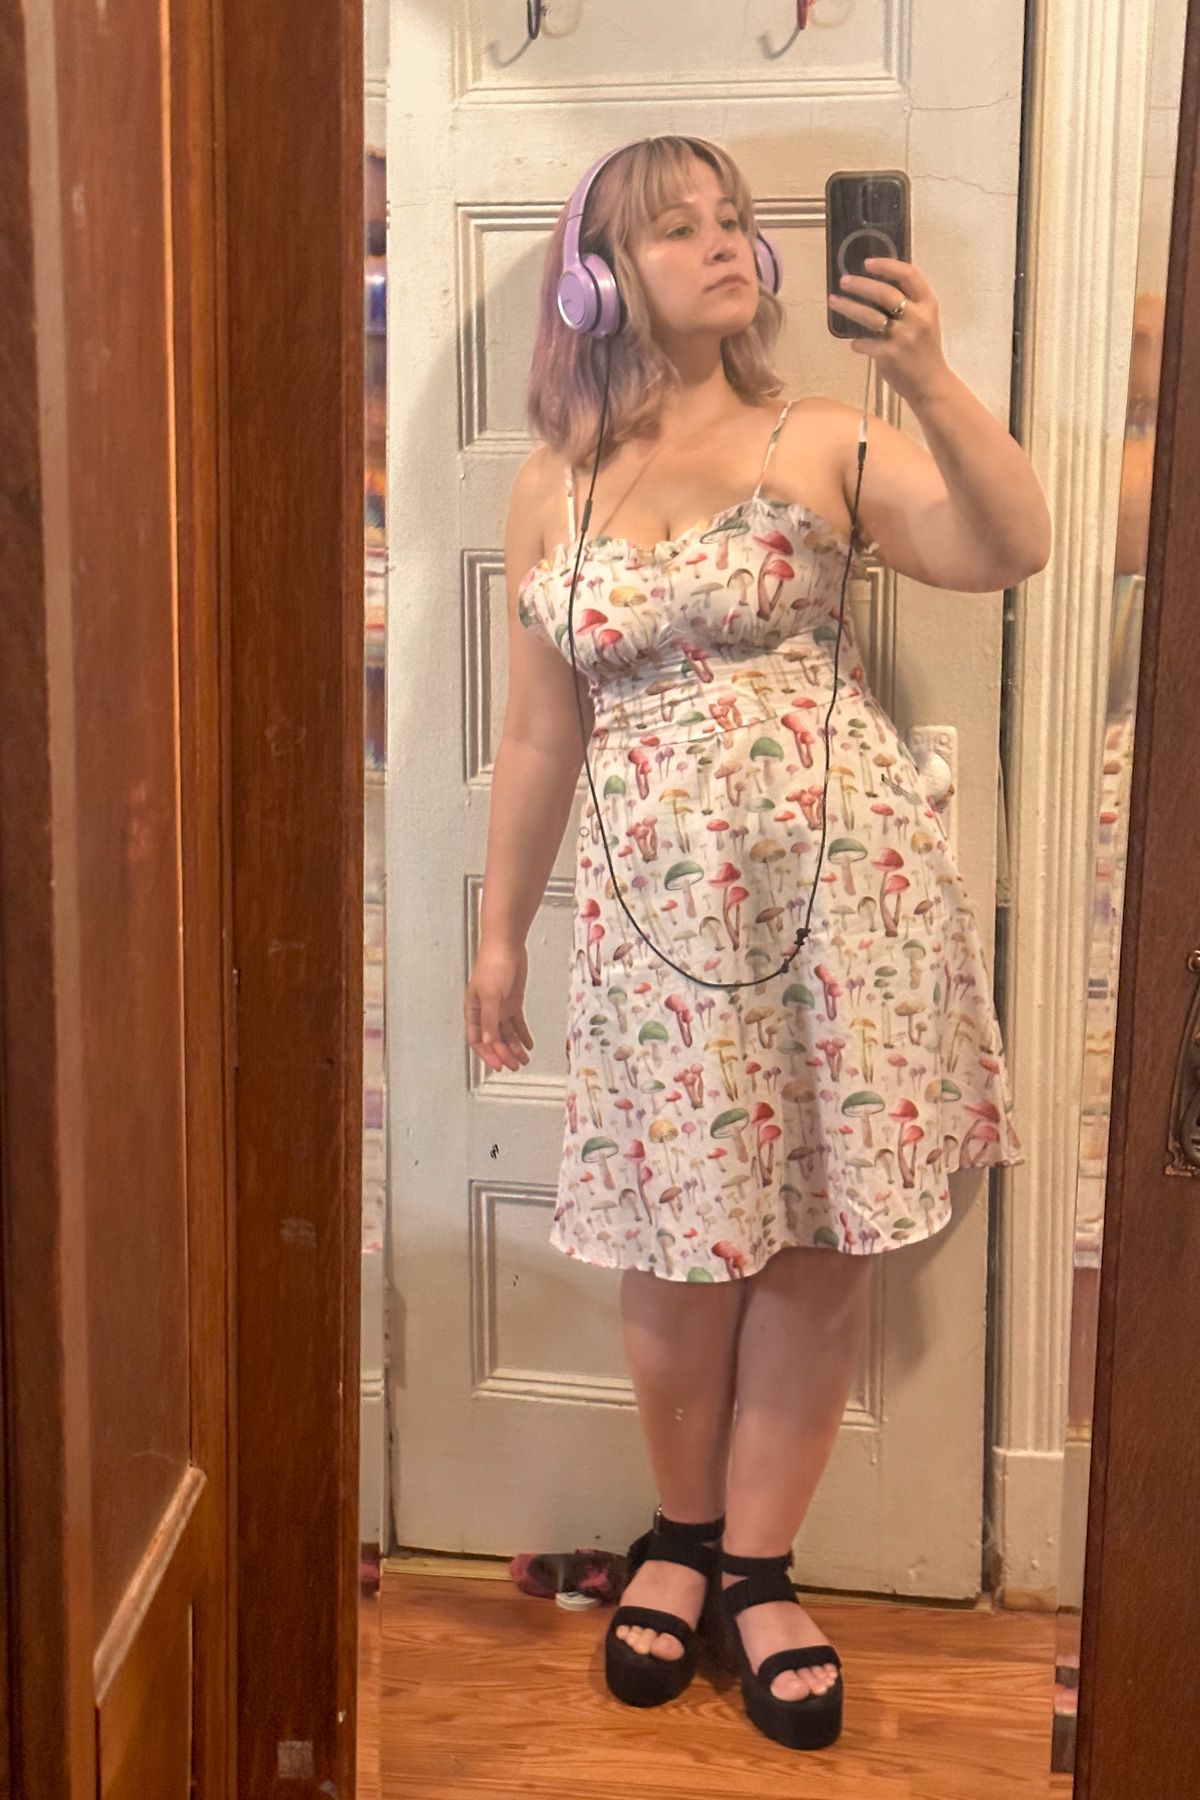 A purple-haired woman wearing a mushroom-printed sundress takes a mirror selfie in a bedroom mirror.